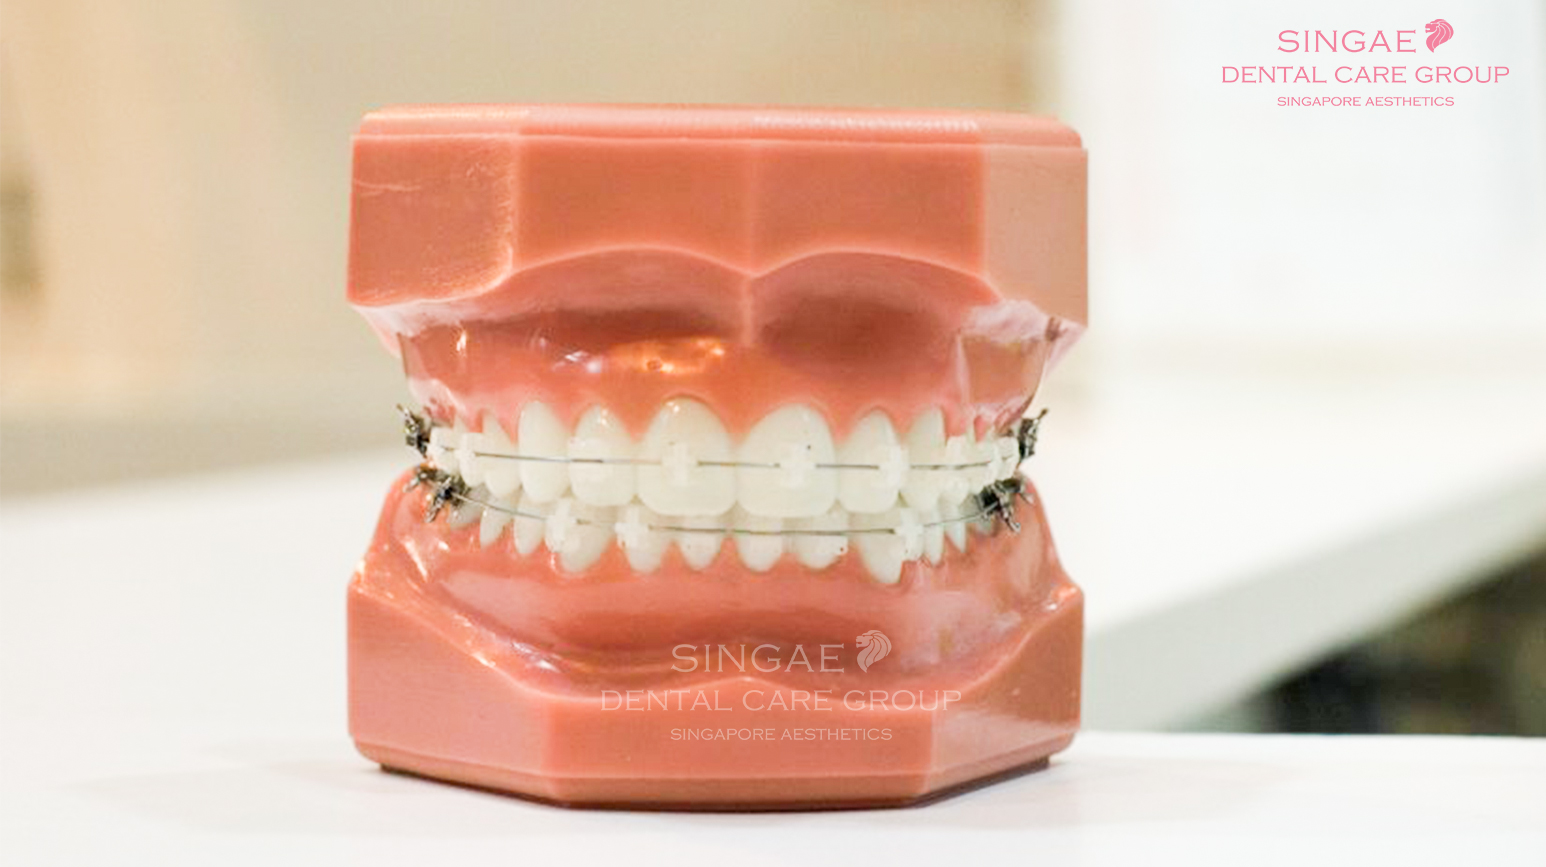 [CRYSTAL BRACES] WHAT IS AND HOW TO CARE AFTER ORTHODONTIC